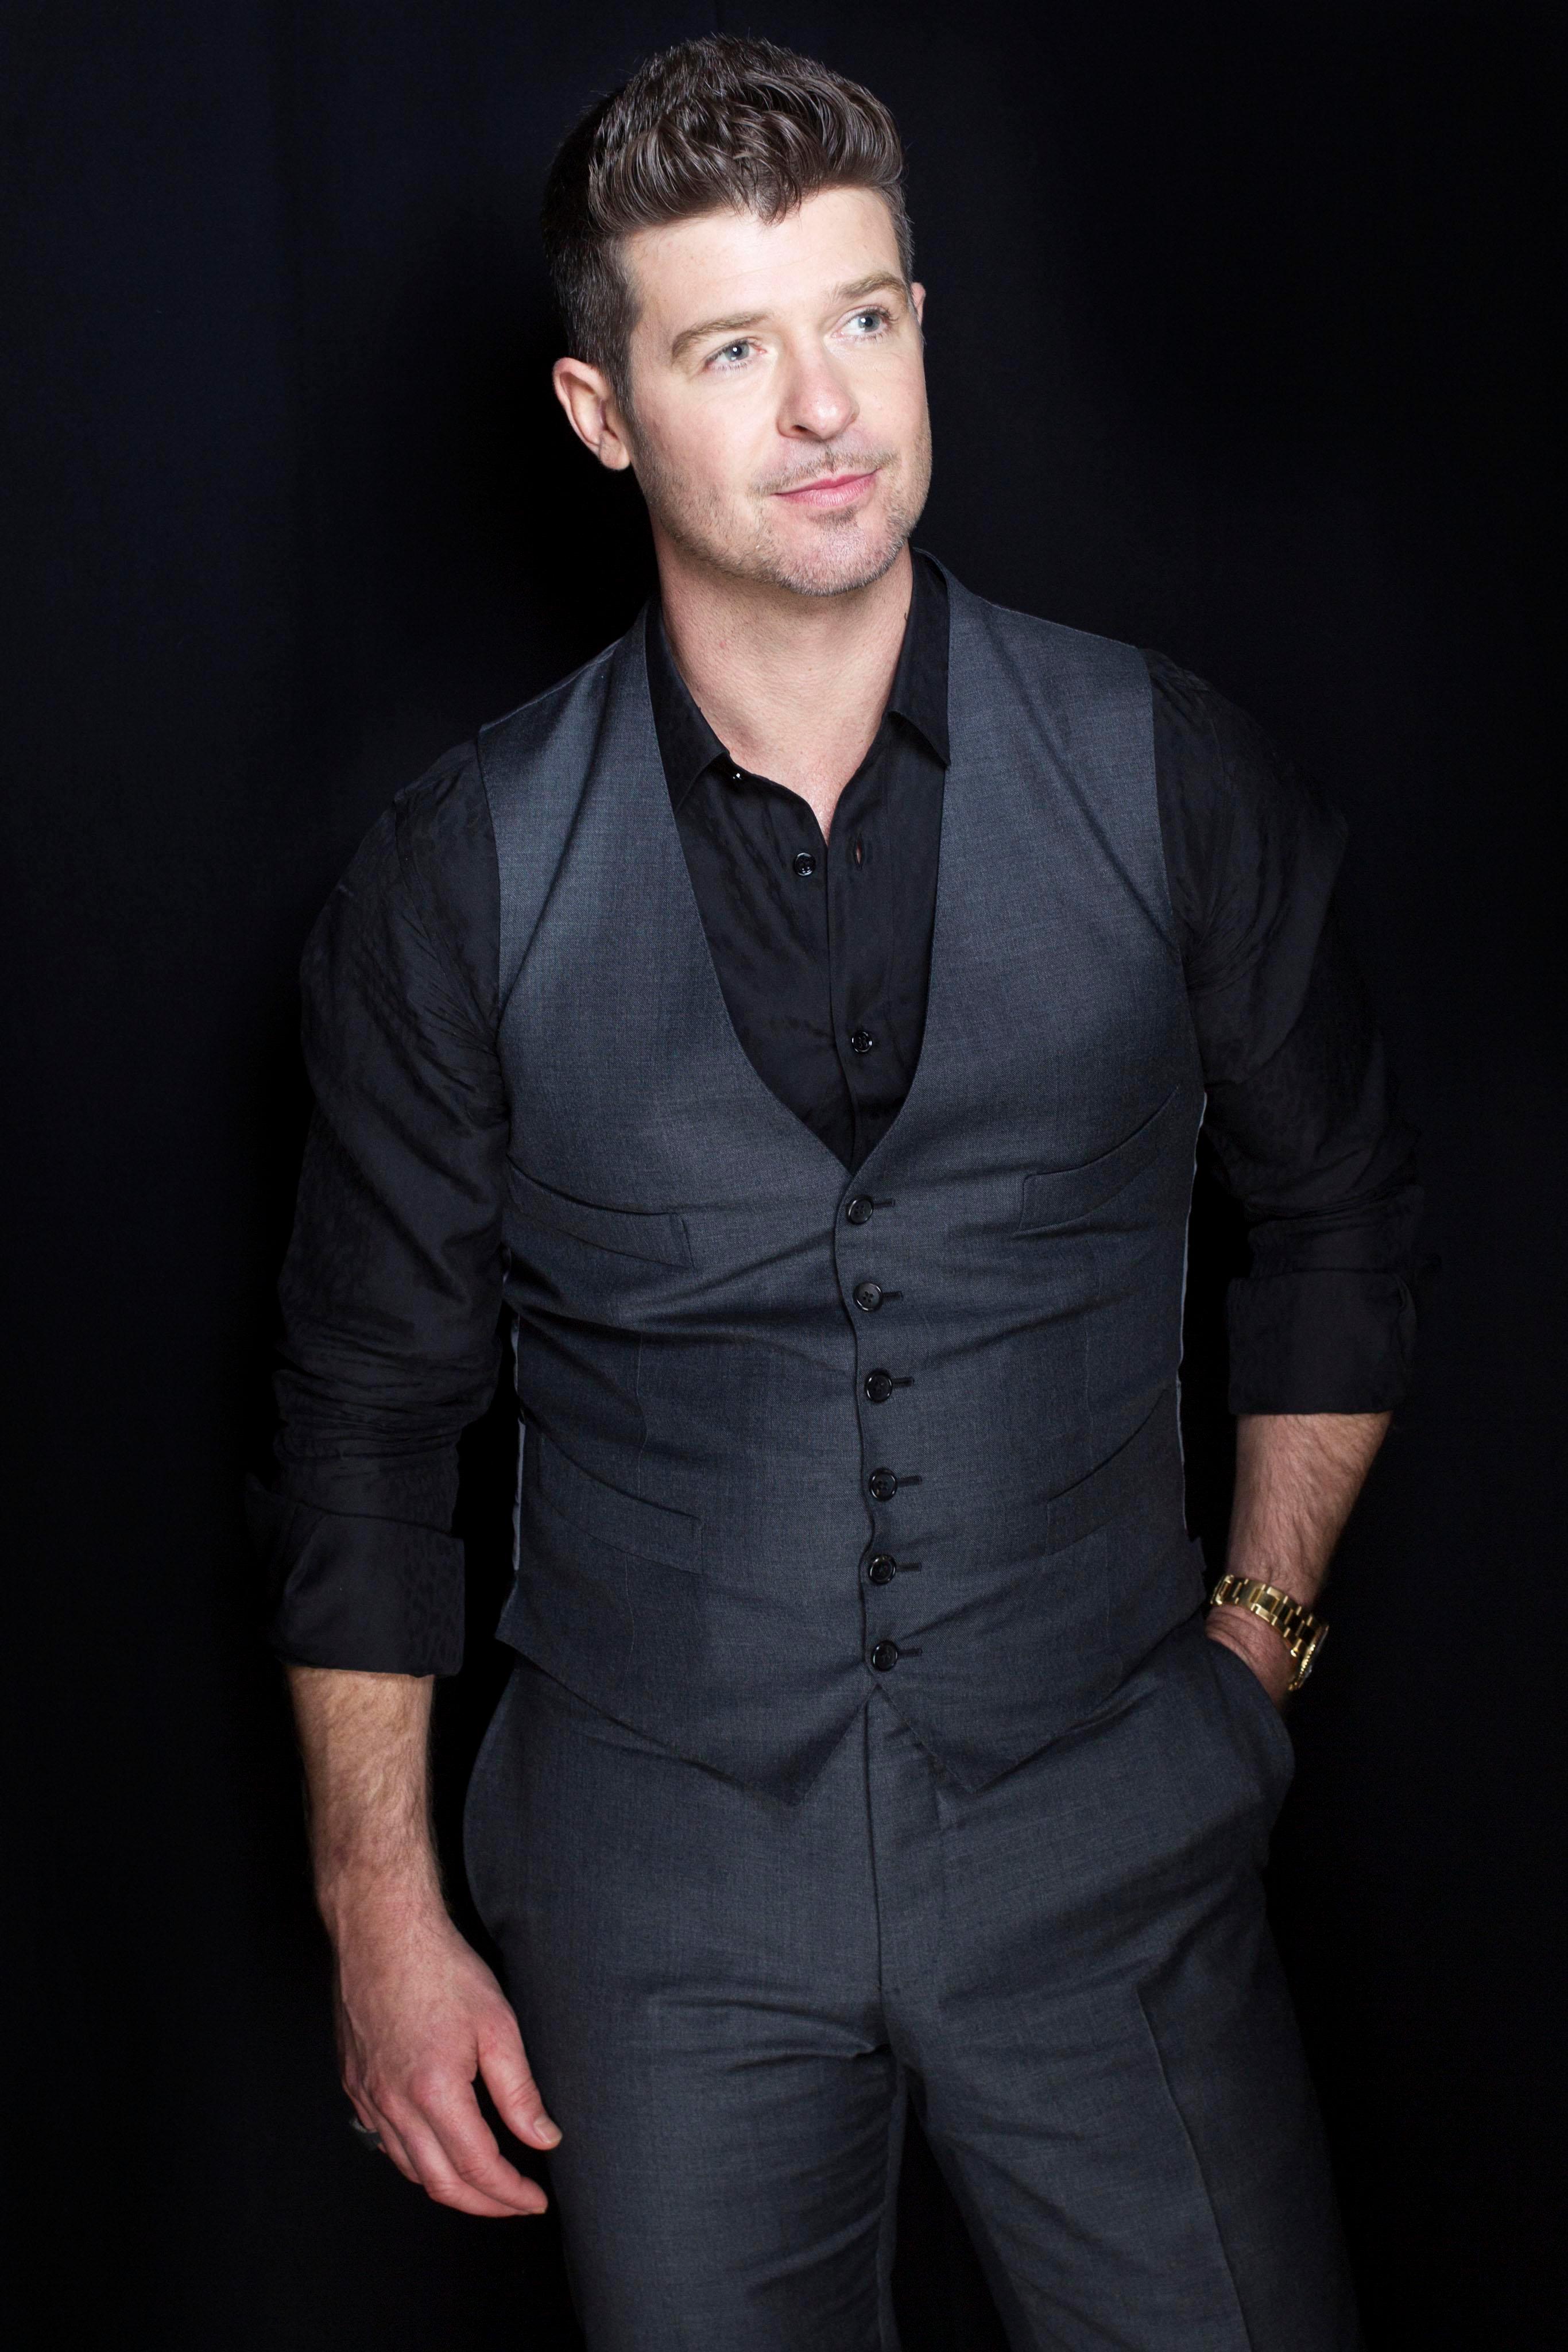 Robin Thicke photo gallery - page #2 | ThePlace